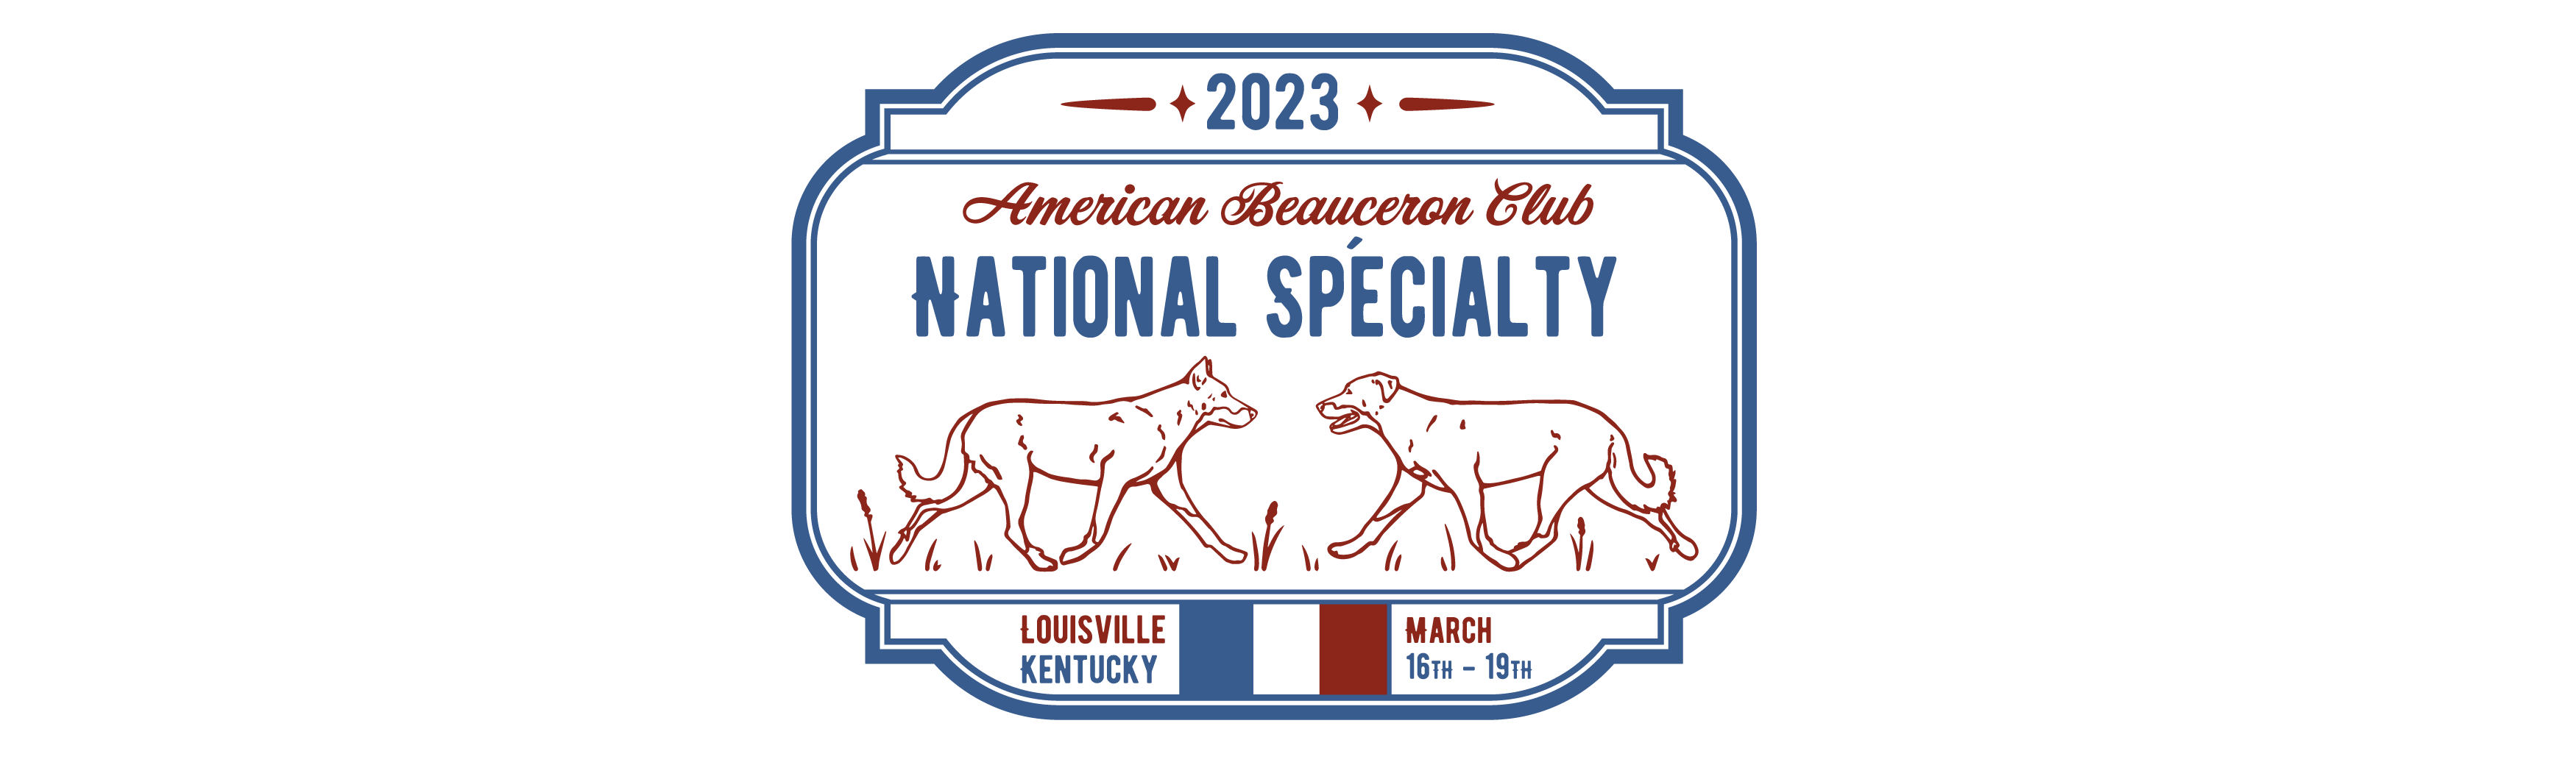 American Beauceron Club National Specialty